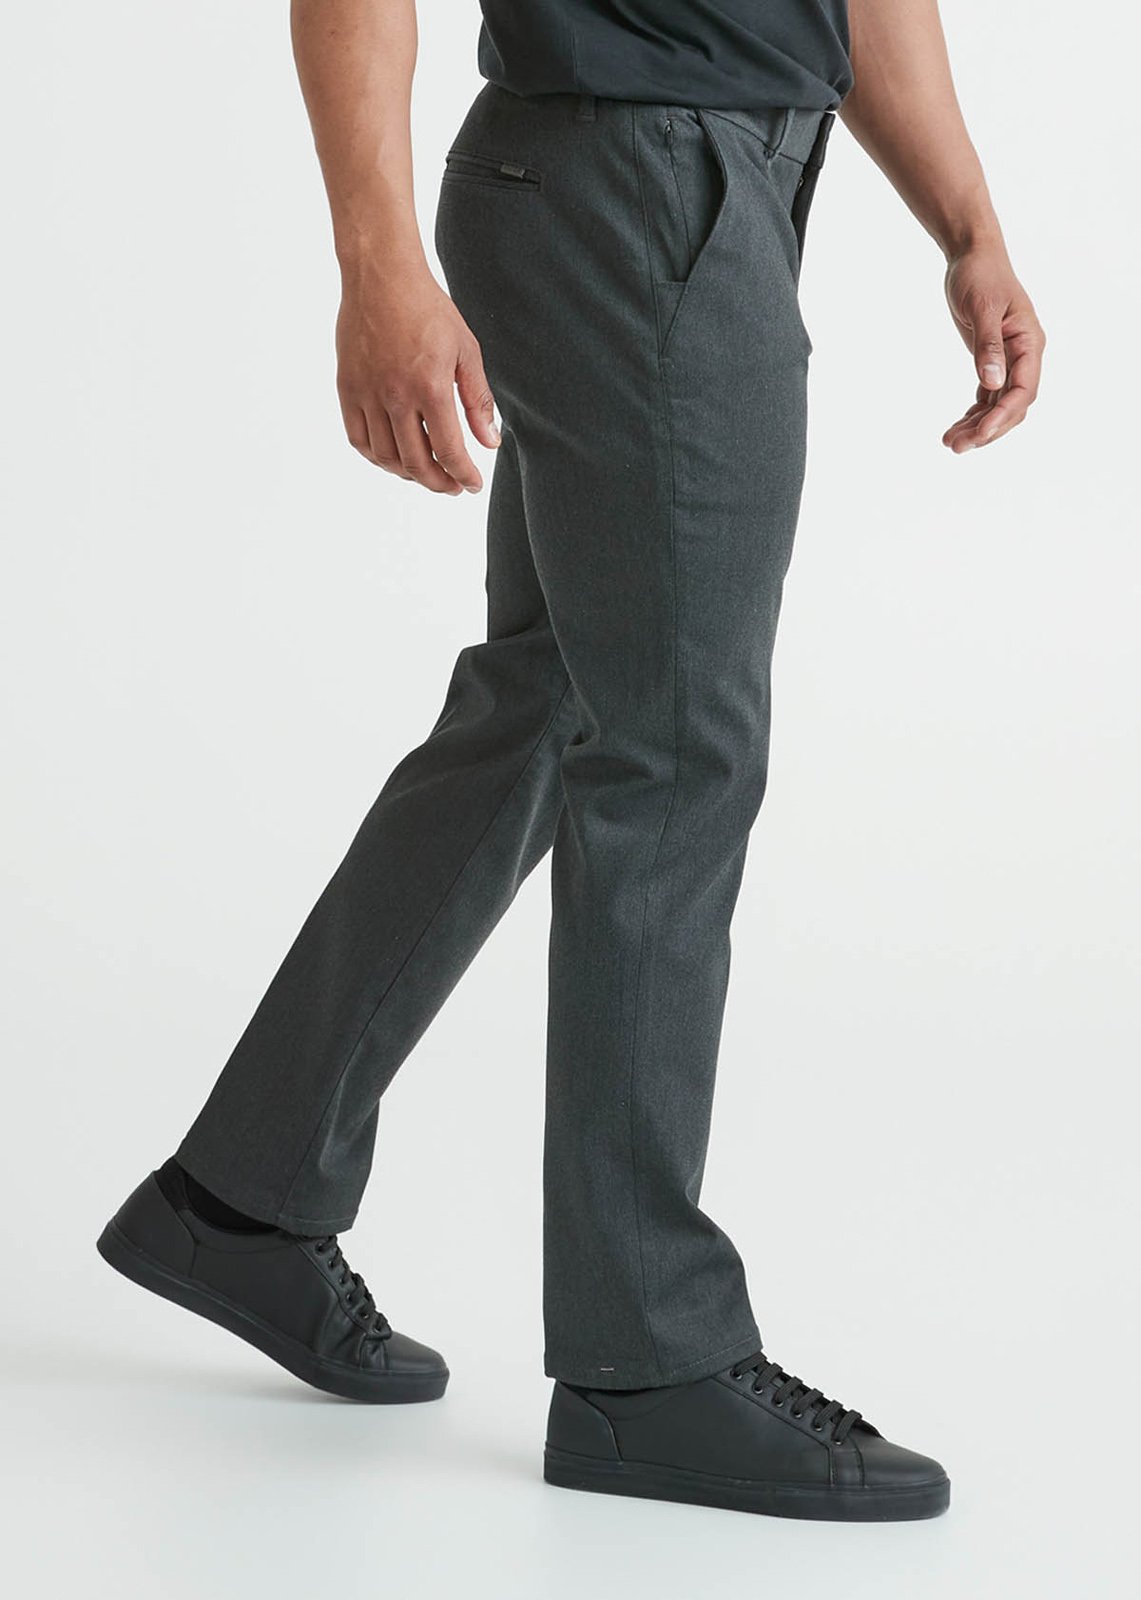 Men Loose Flared Dress Pants Trousers Stretch Casual Smart